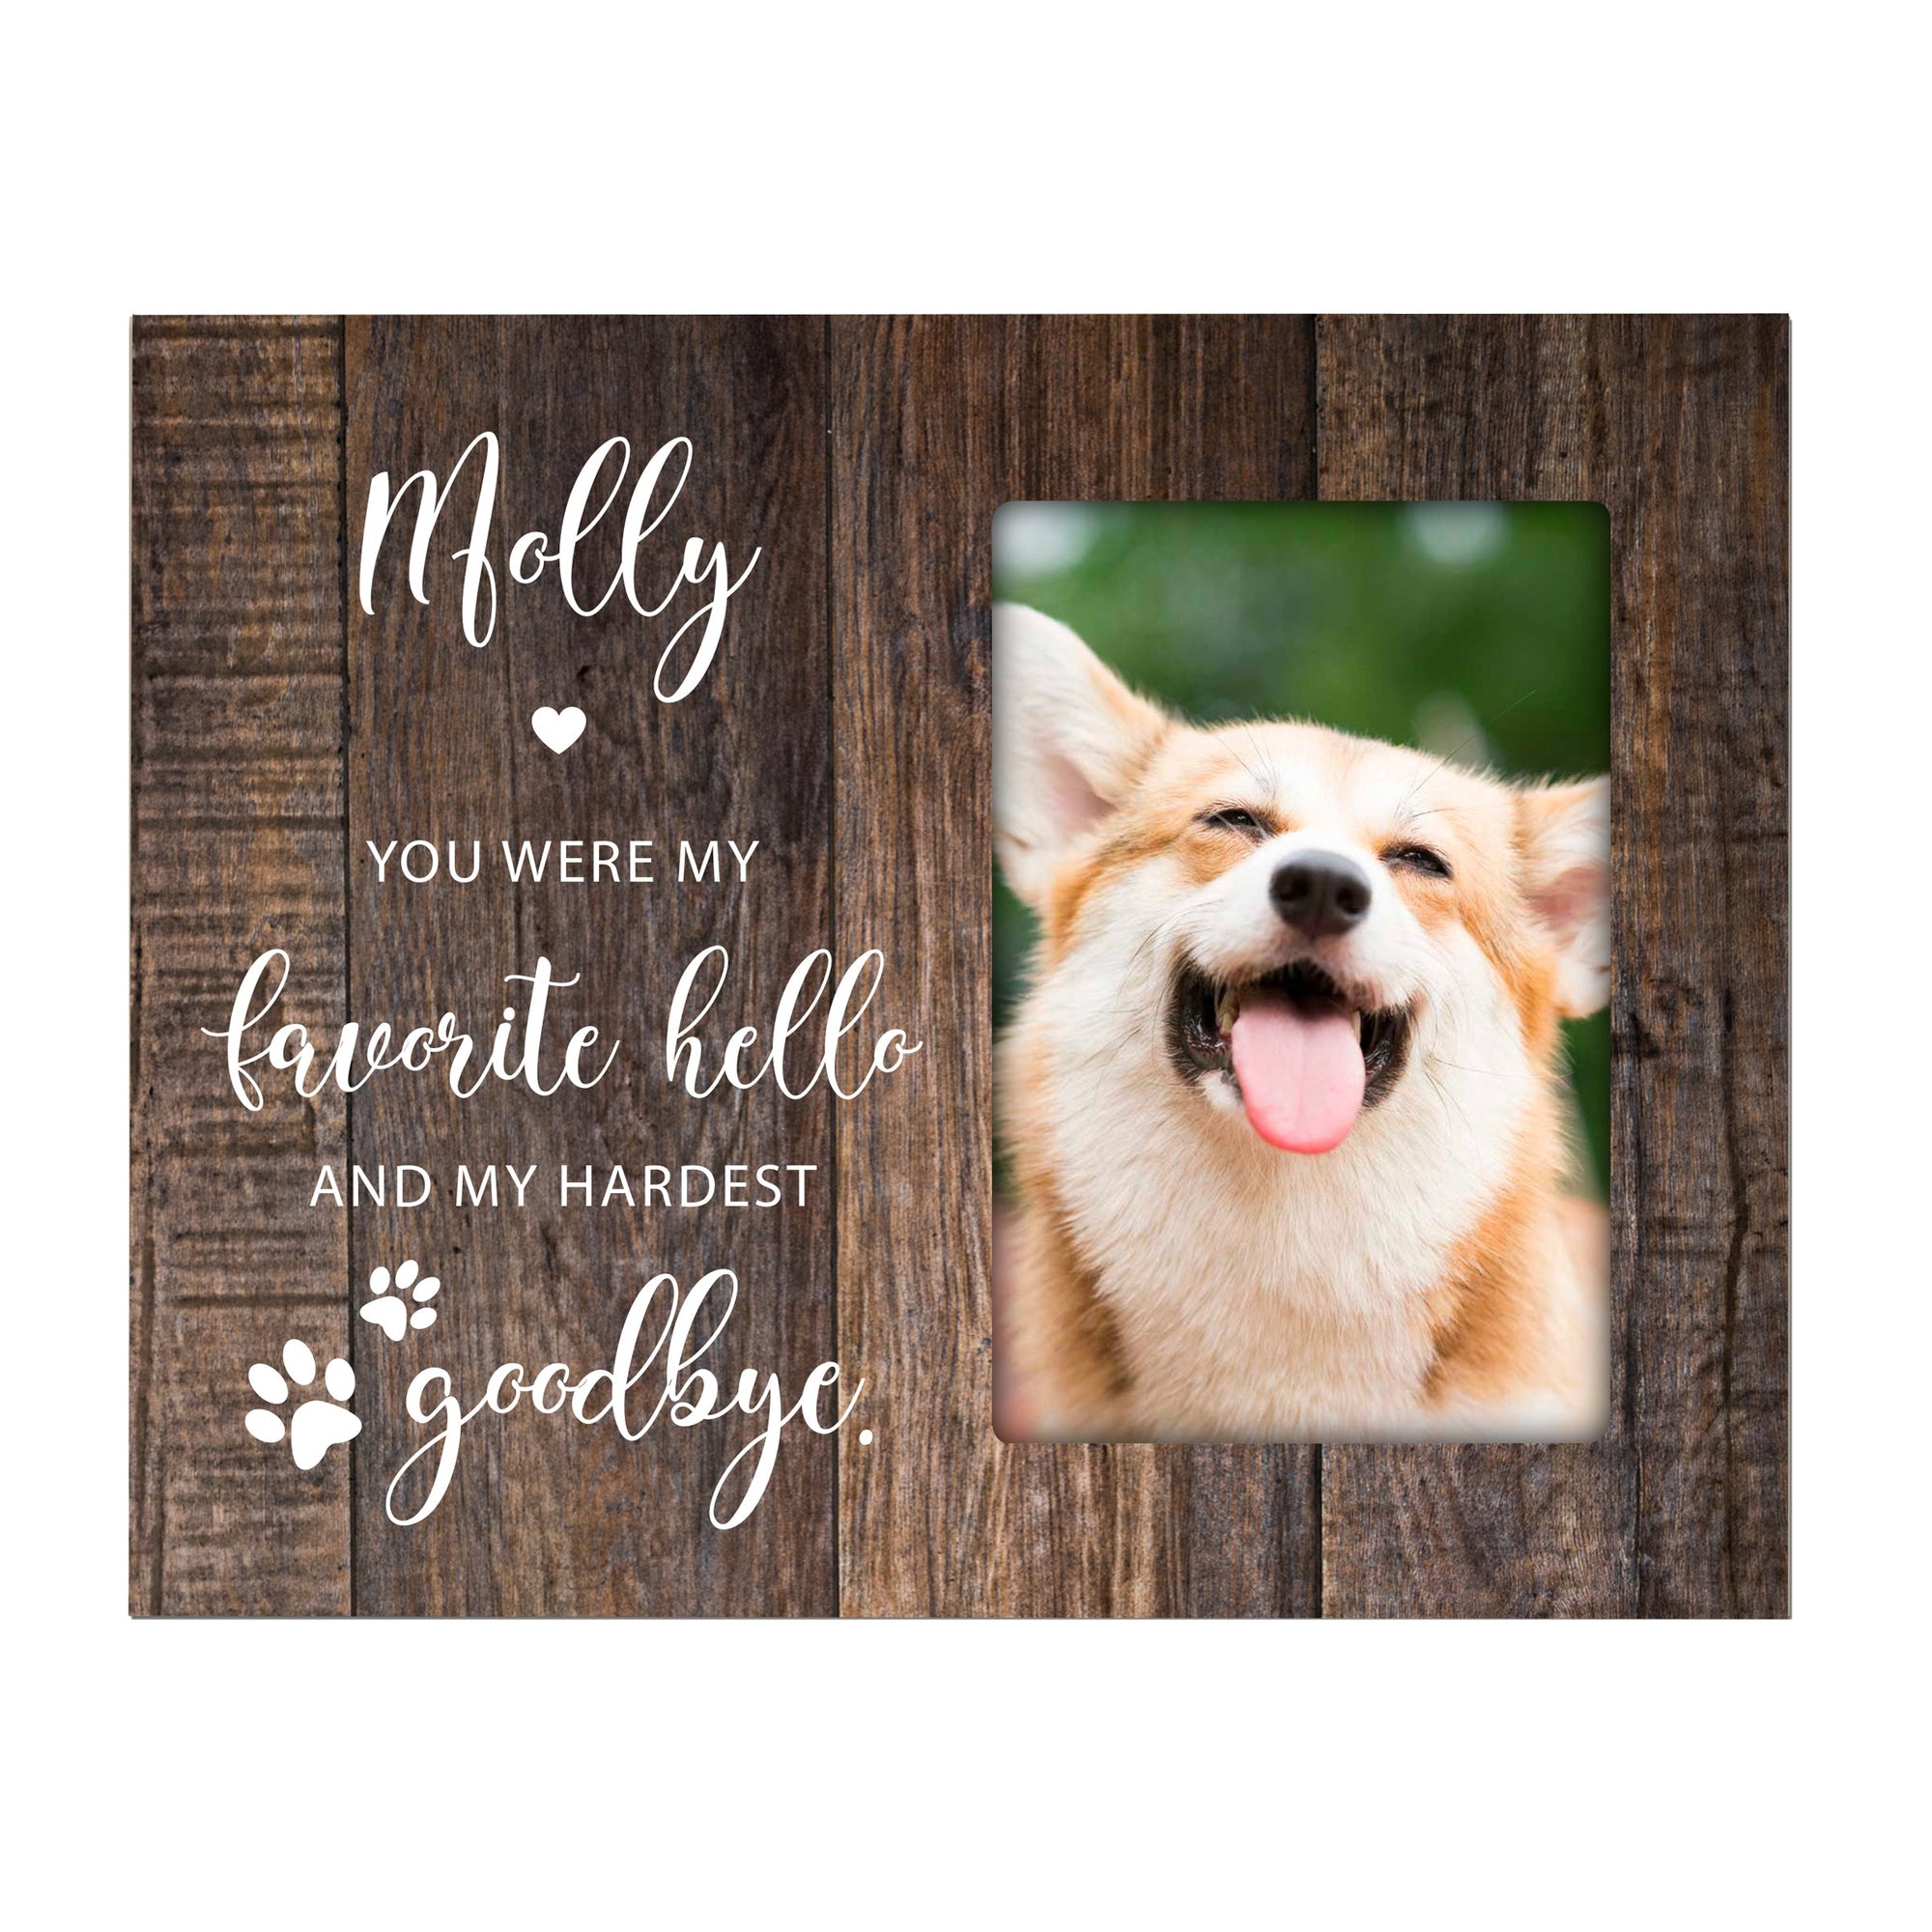 Pet Memorial Picture Frame -  You Were My Favorite Hello